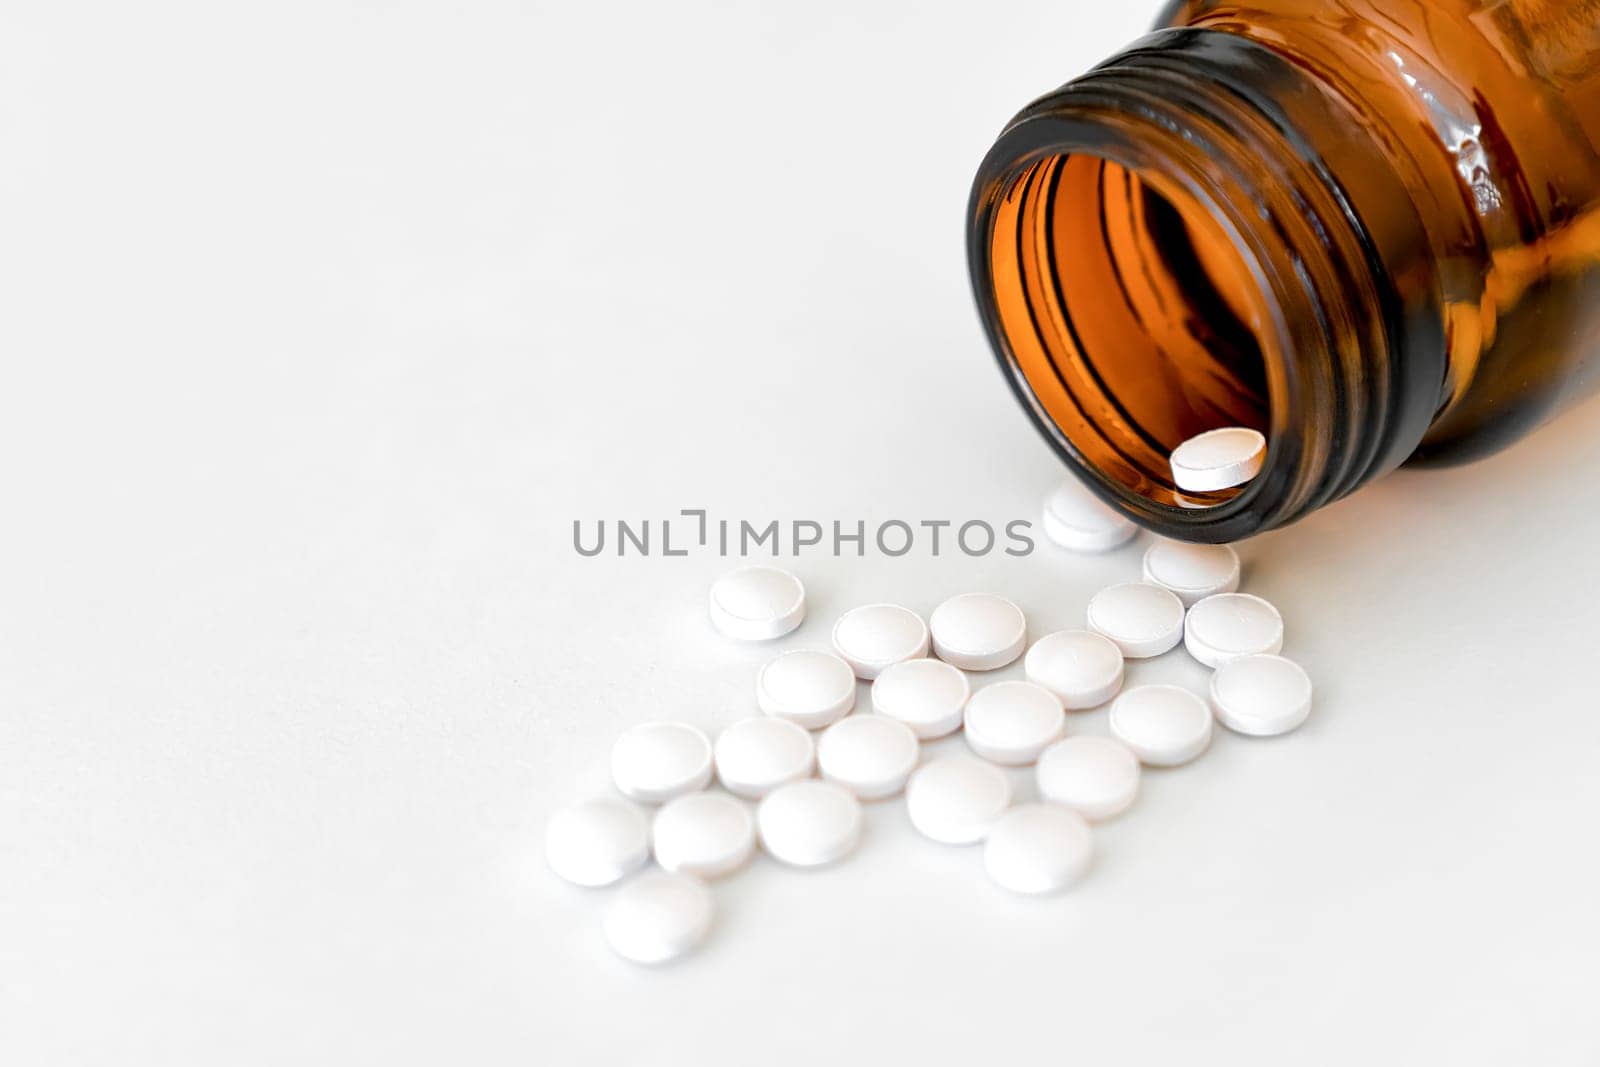 Medication Close-Up: White Pills and Brown Glass Vial Arranged on Table, Copy Space, Close-Up, Healthcare Concept..